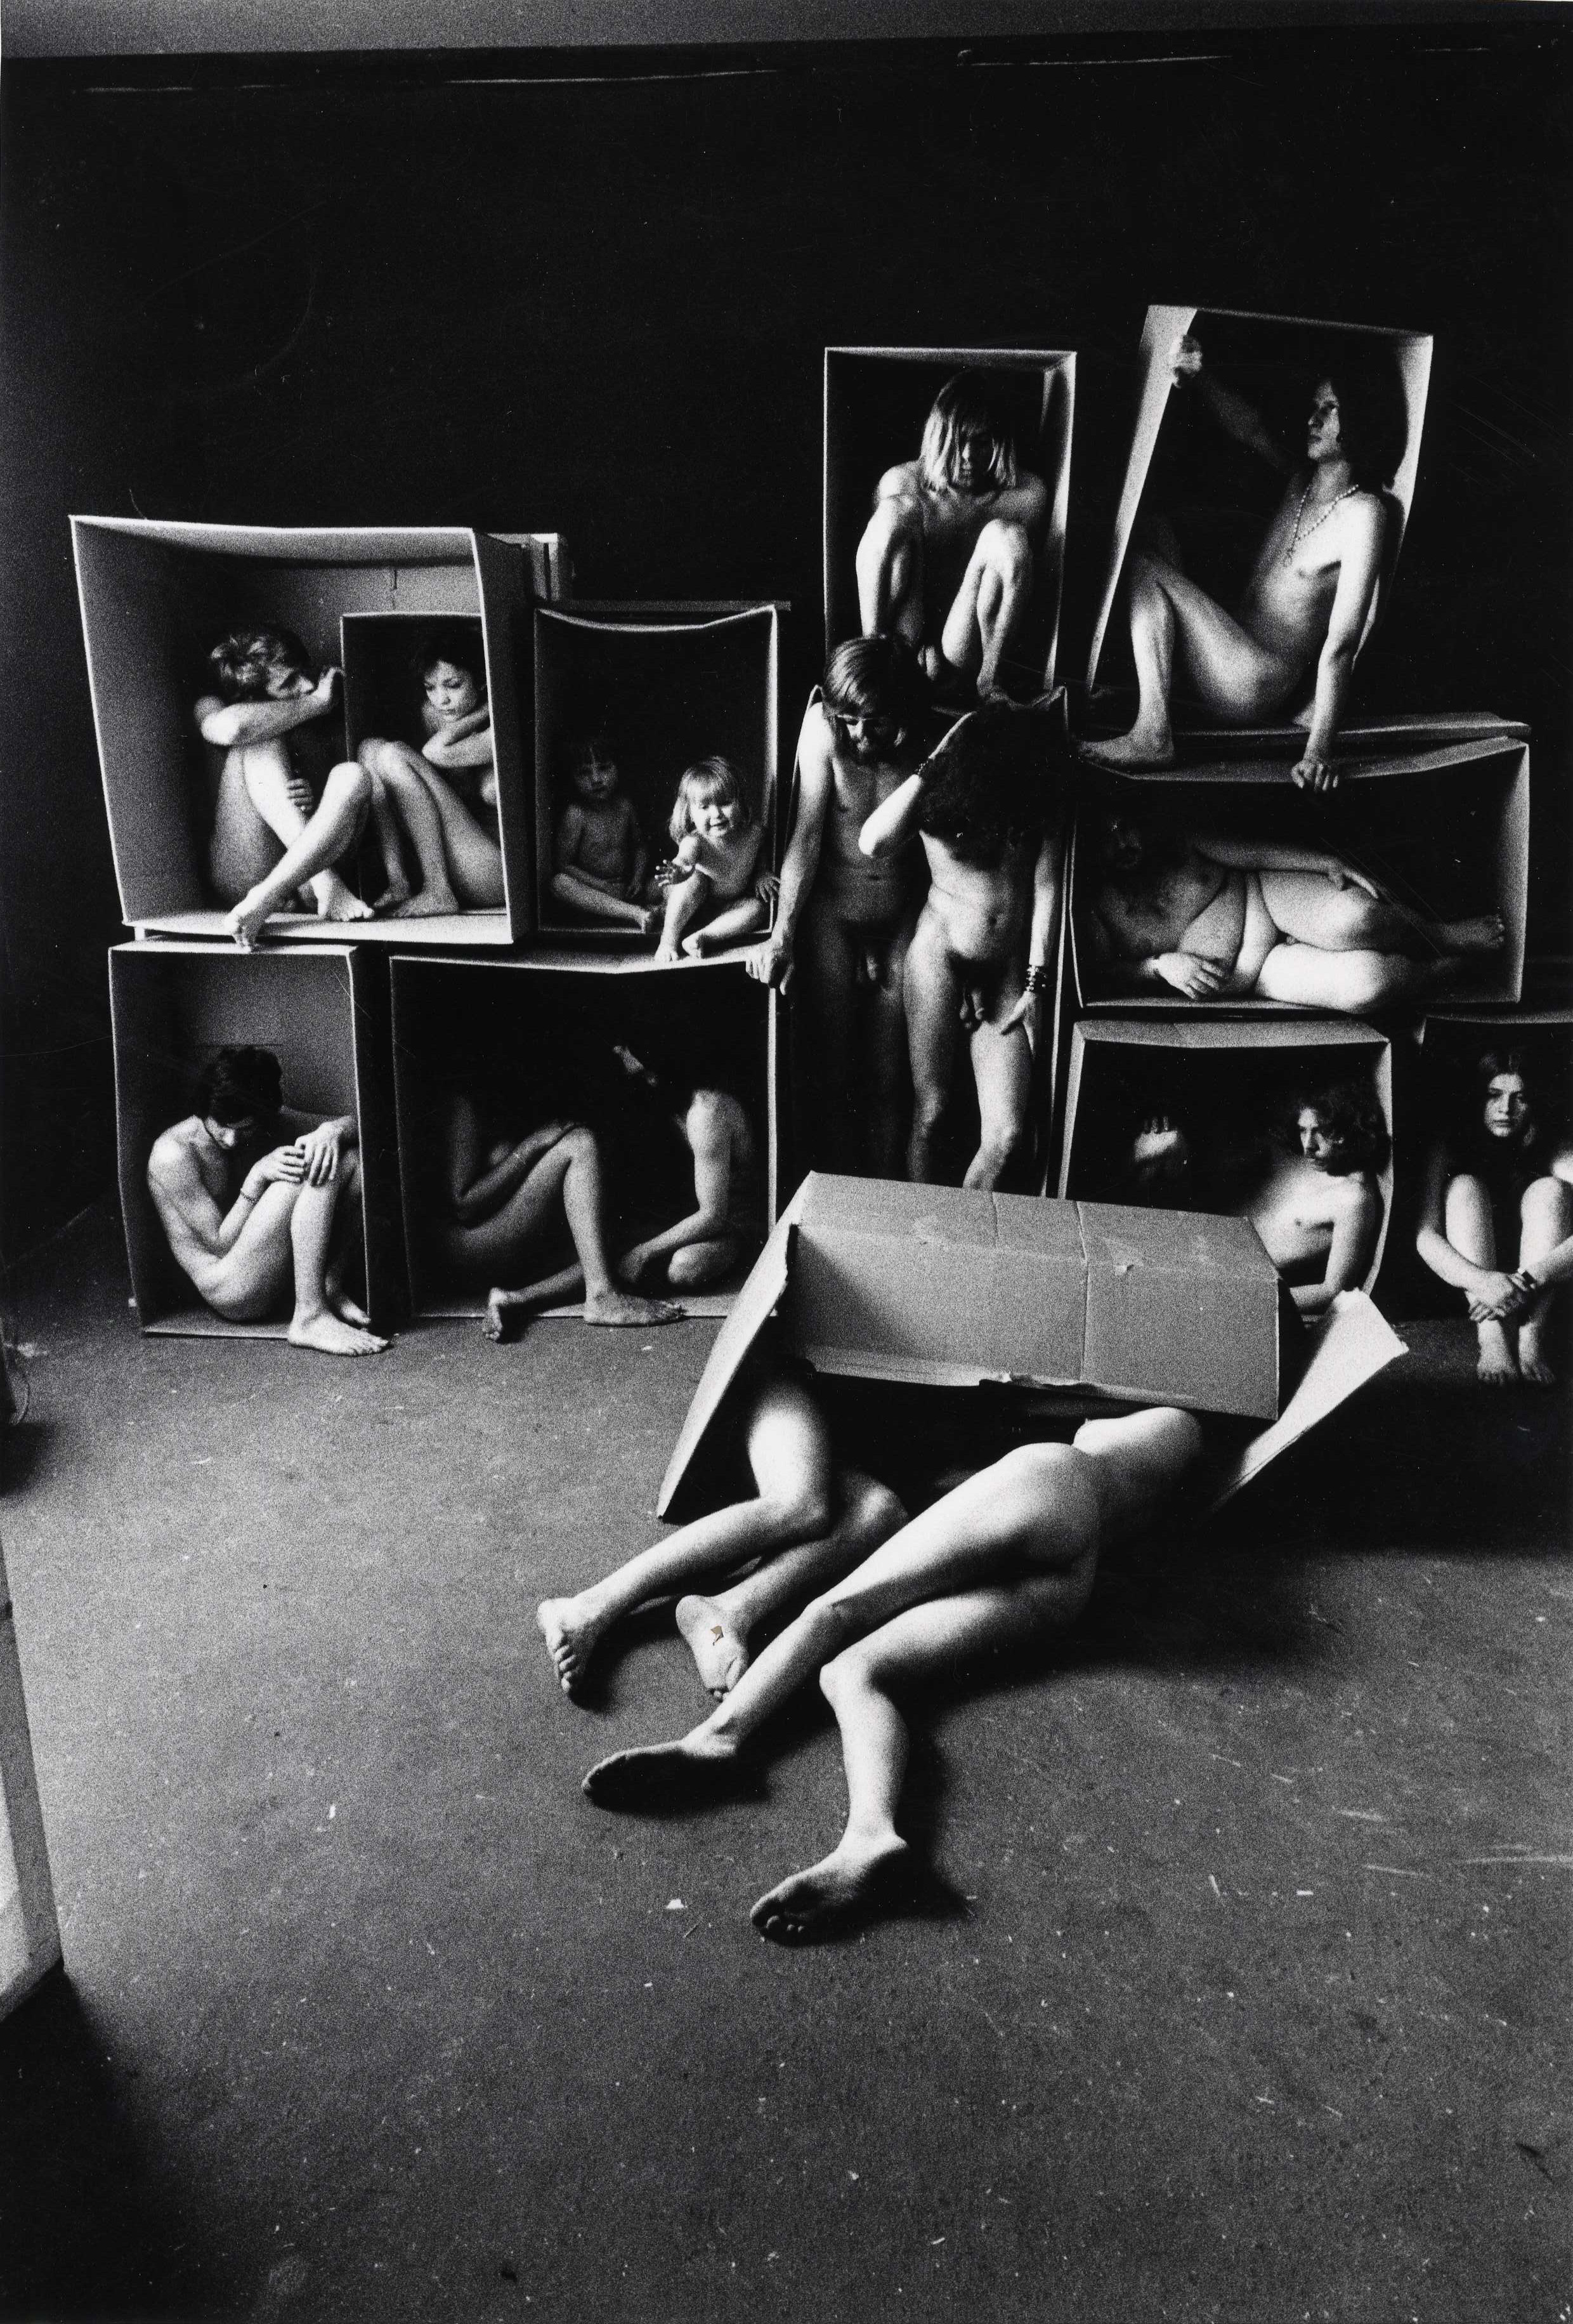 Will McBride's people in cardboard boxes, 1960s-1970s